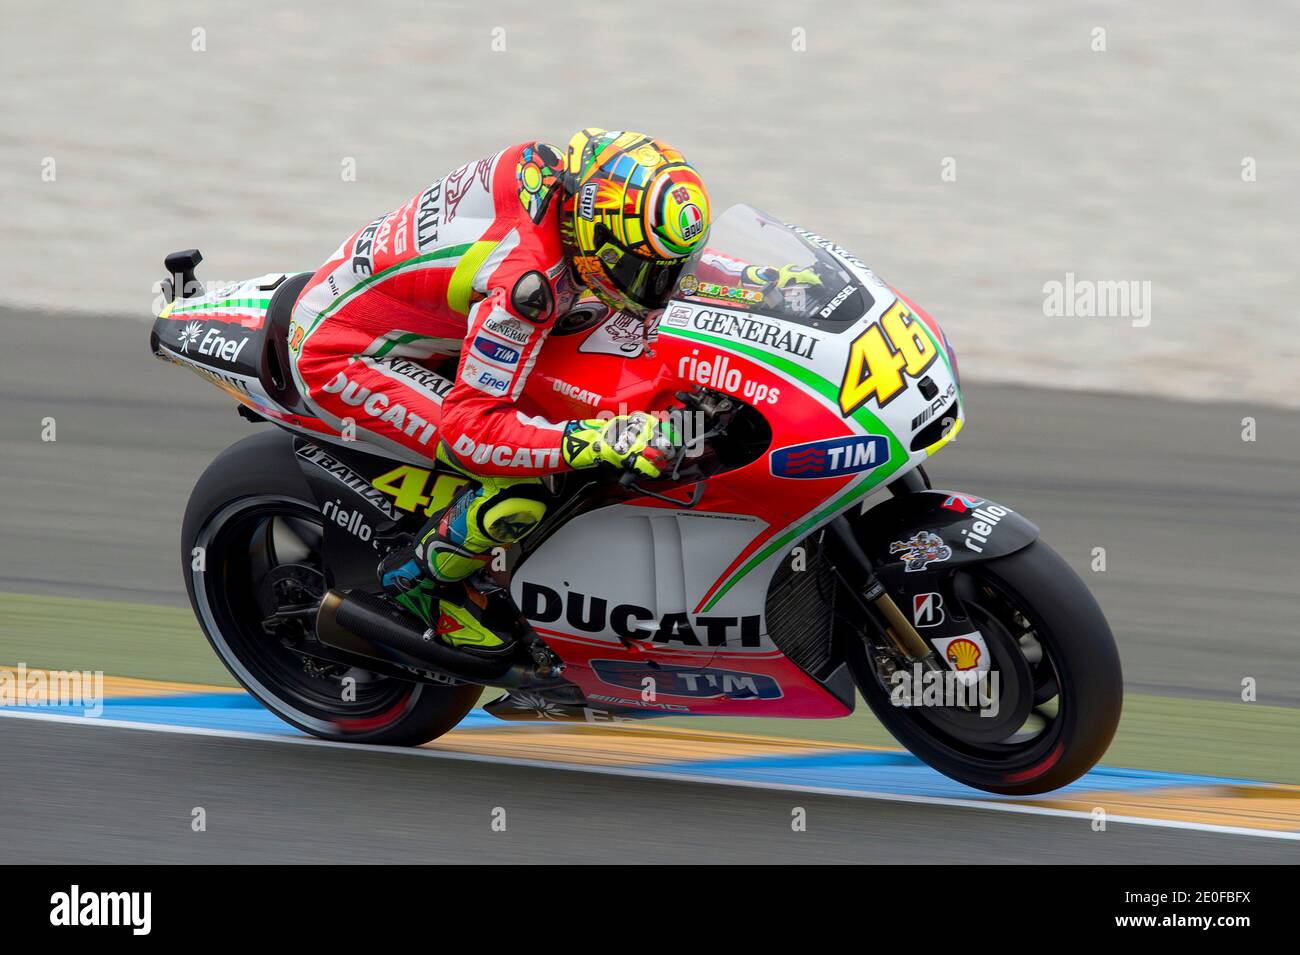 Italy's MotoGP rider Valentino Rossi from Ducati during Tests of France  Grand Prix in Le Mans, France on May 18, 2012. Photo by  Malkon/ABACAPRESS.COM Stock Photo - Alamy